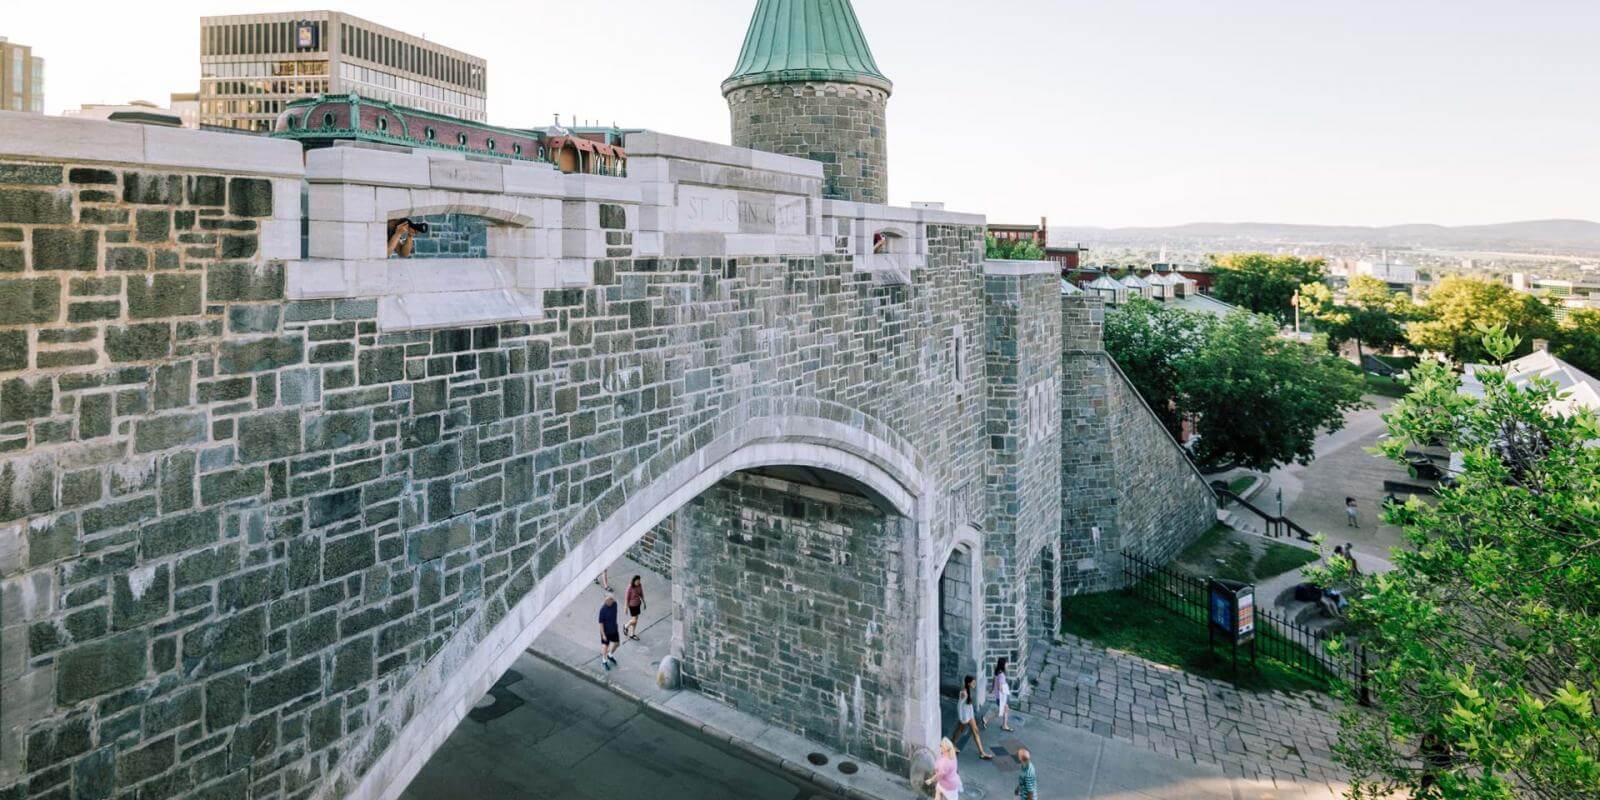 Rue Saint-Jean and Porte Saint-Jean, seen from the top of the fortifications of Québec.